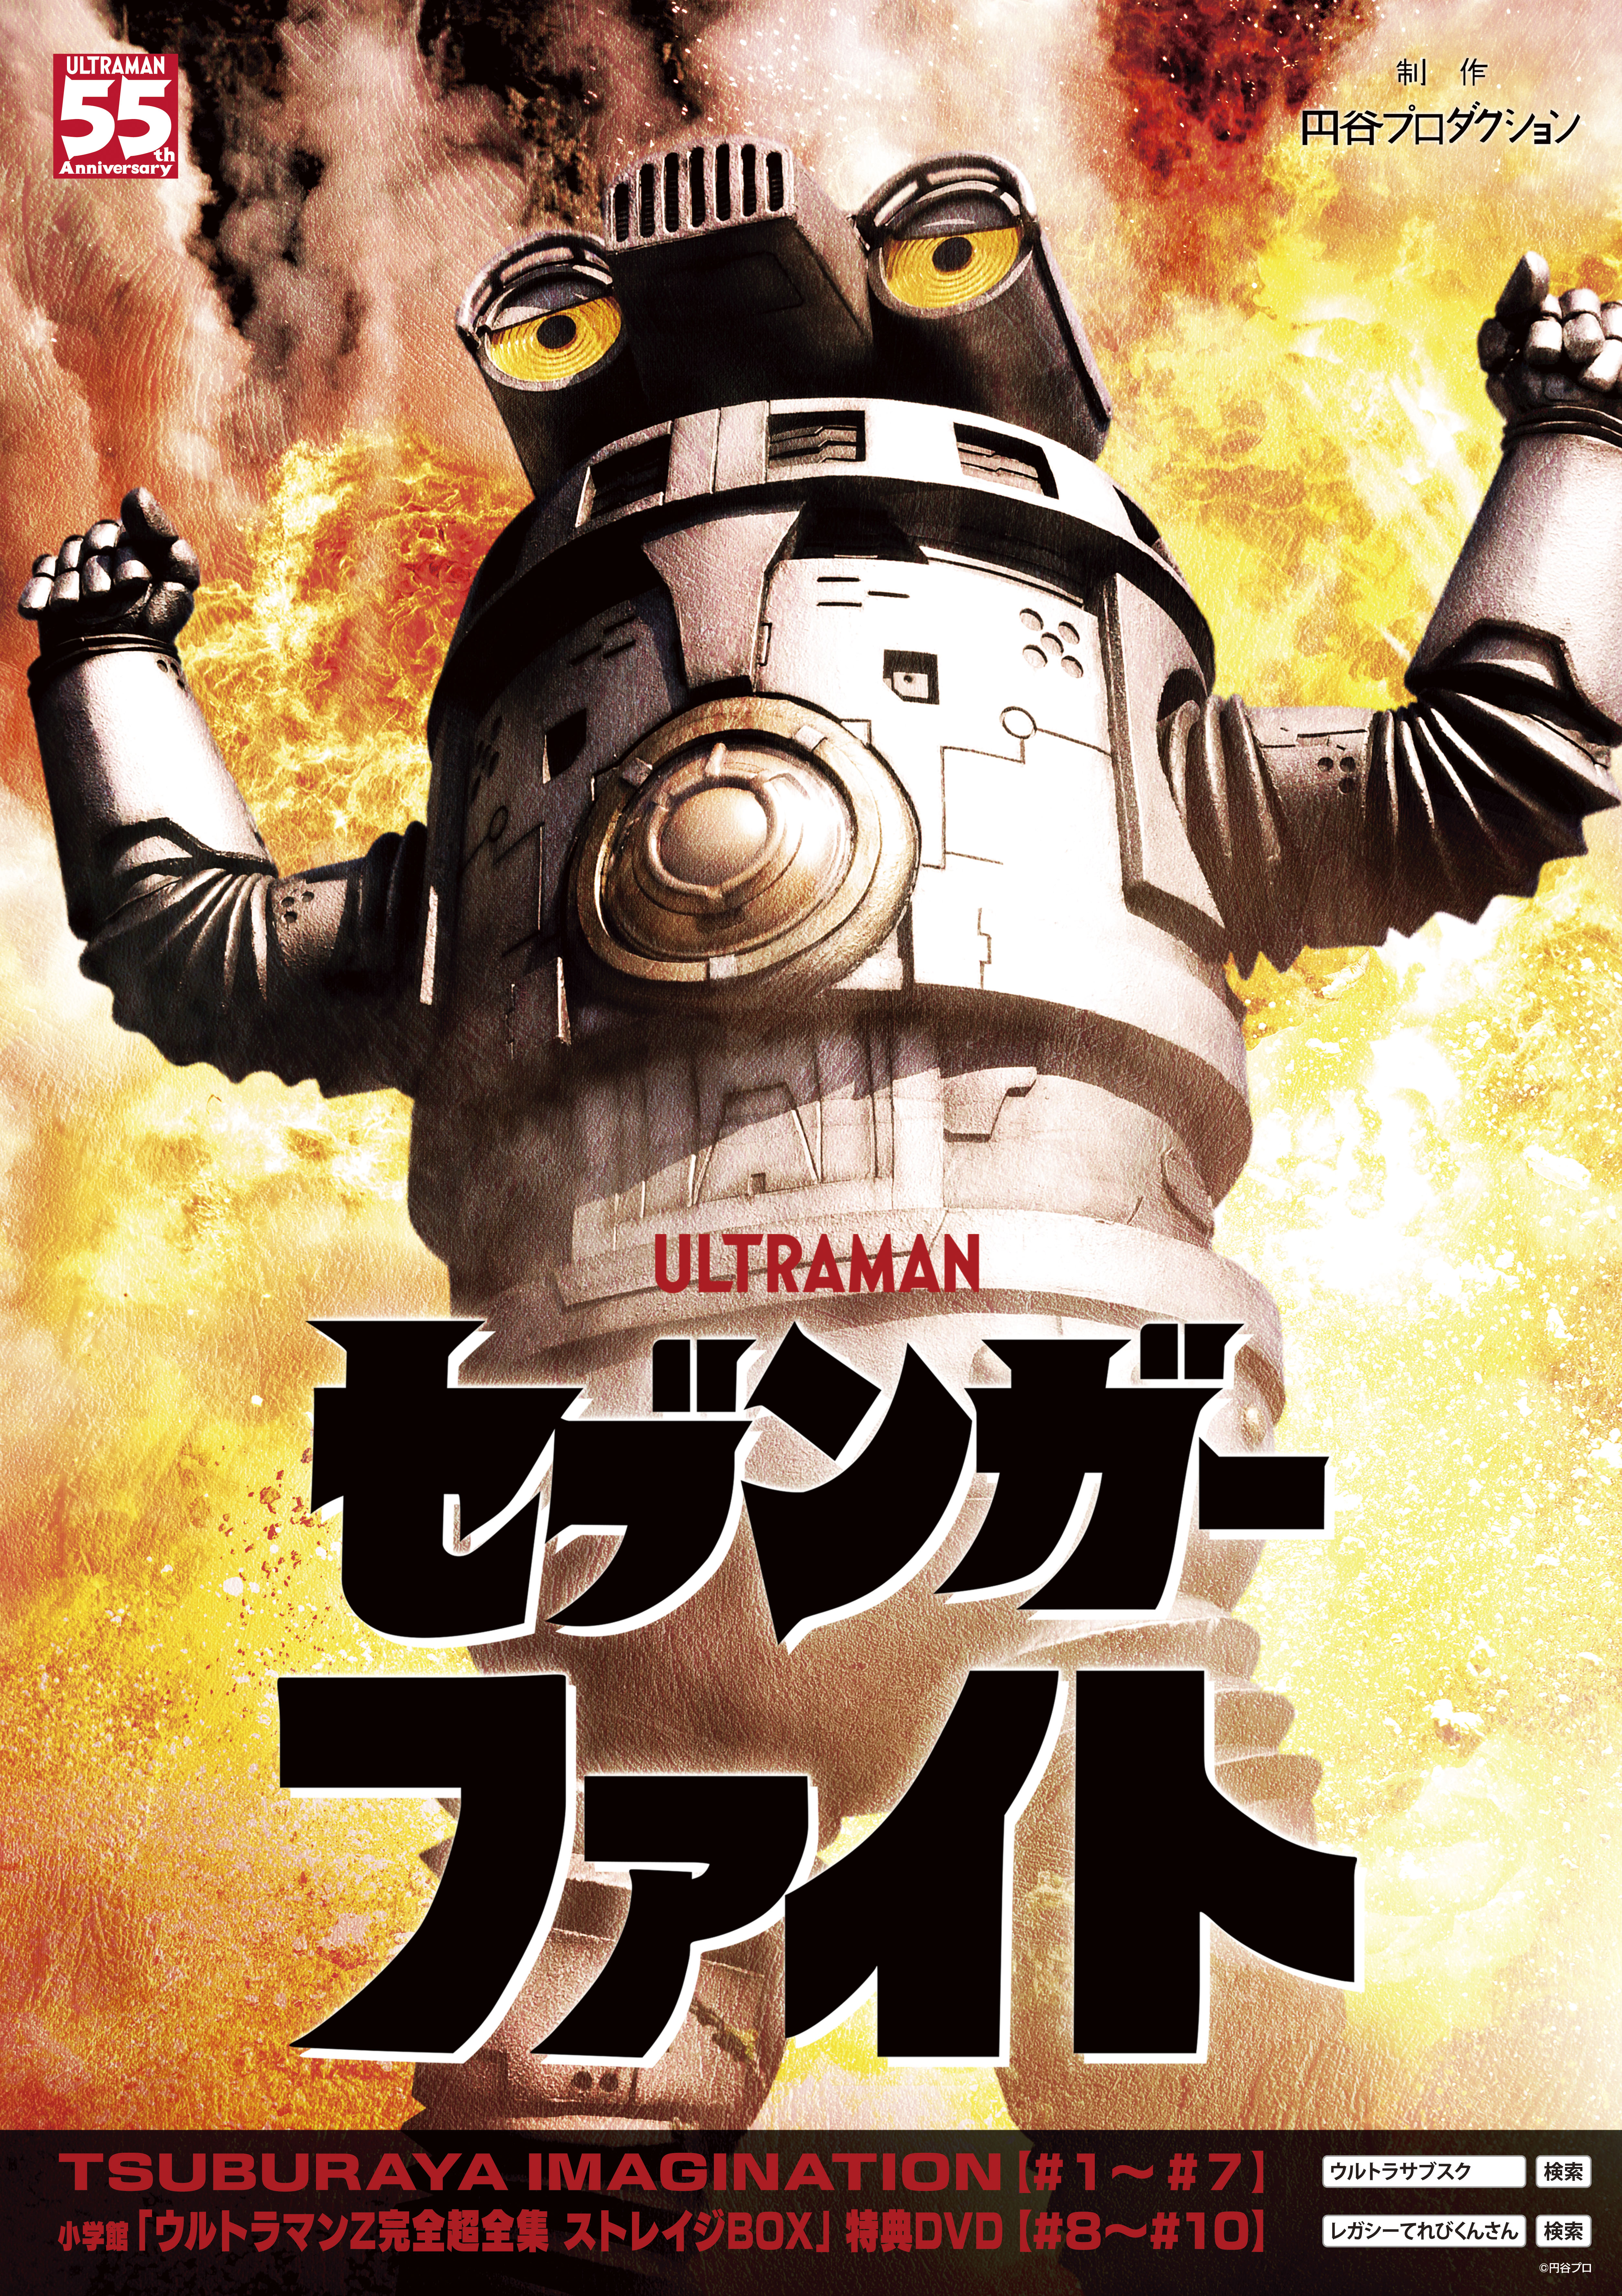 The Mini-Series SEVENGER FIGHT Joins Tsuburaya Productions' First 